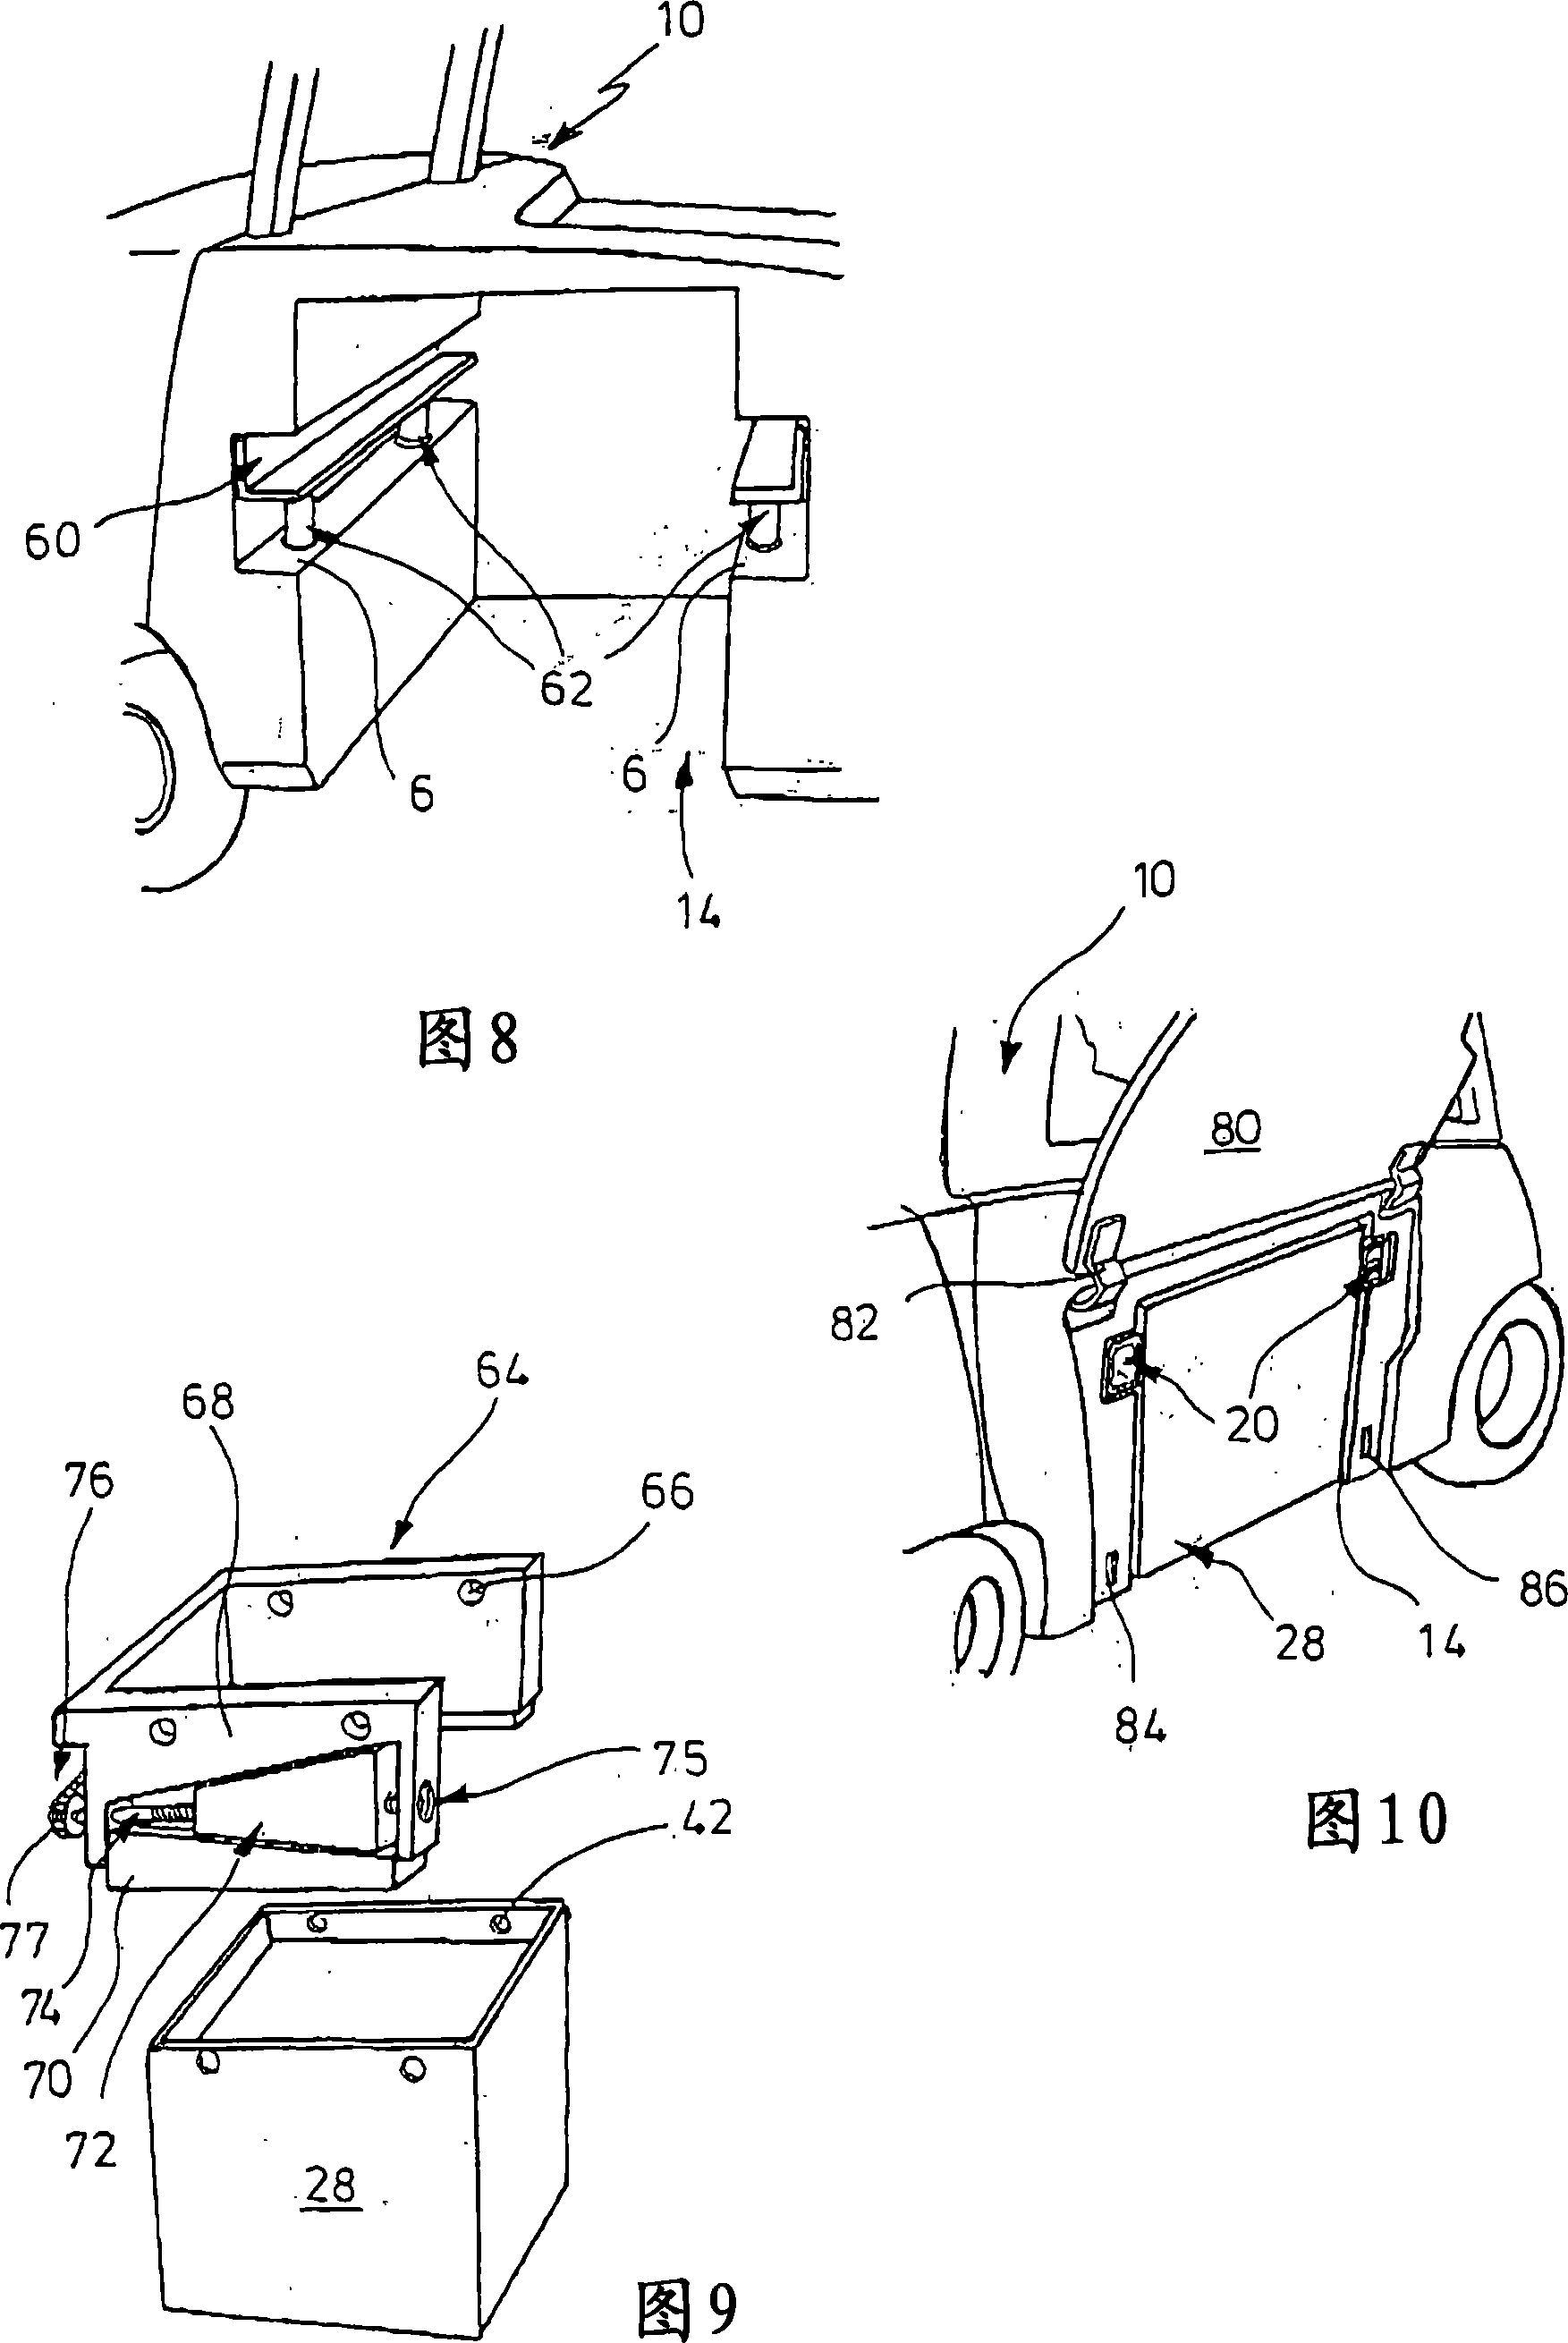 Battery exchange system for a battery-driven industrial truck